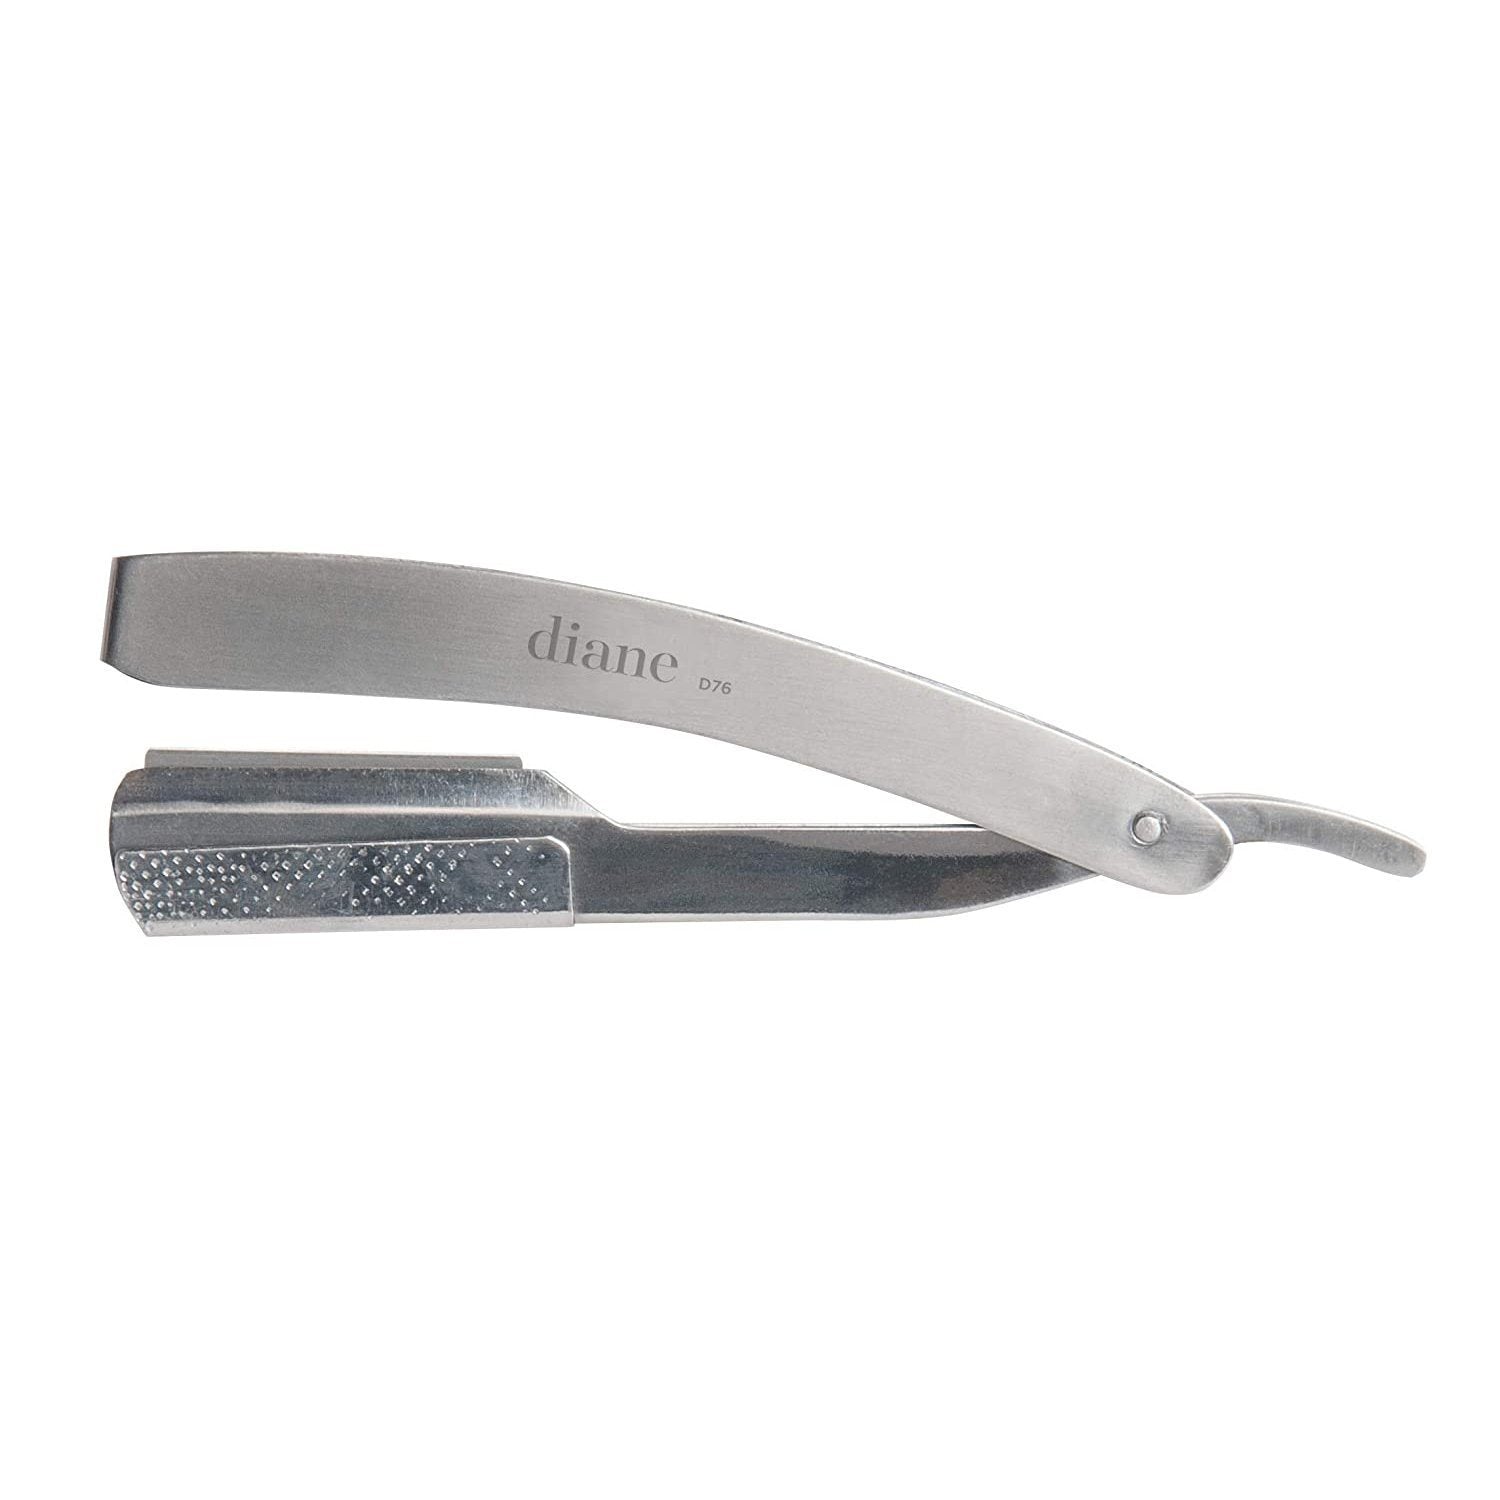 Stainless Steel Straight Razor | D76 HAIR COLORING ACCESSORIES DIANE 